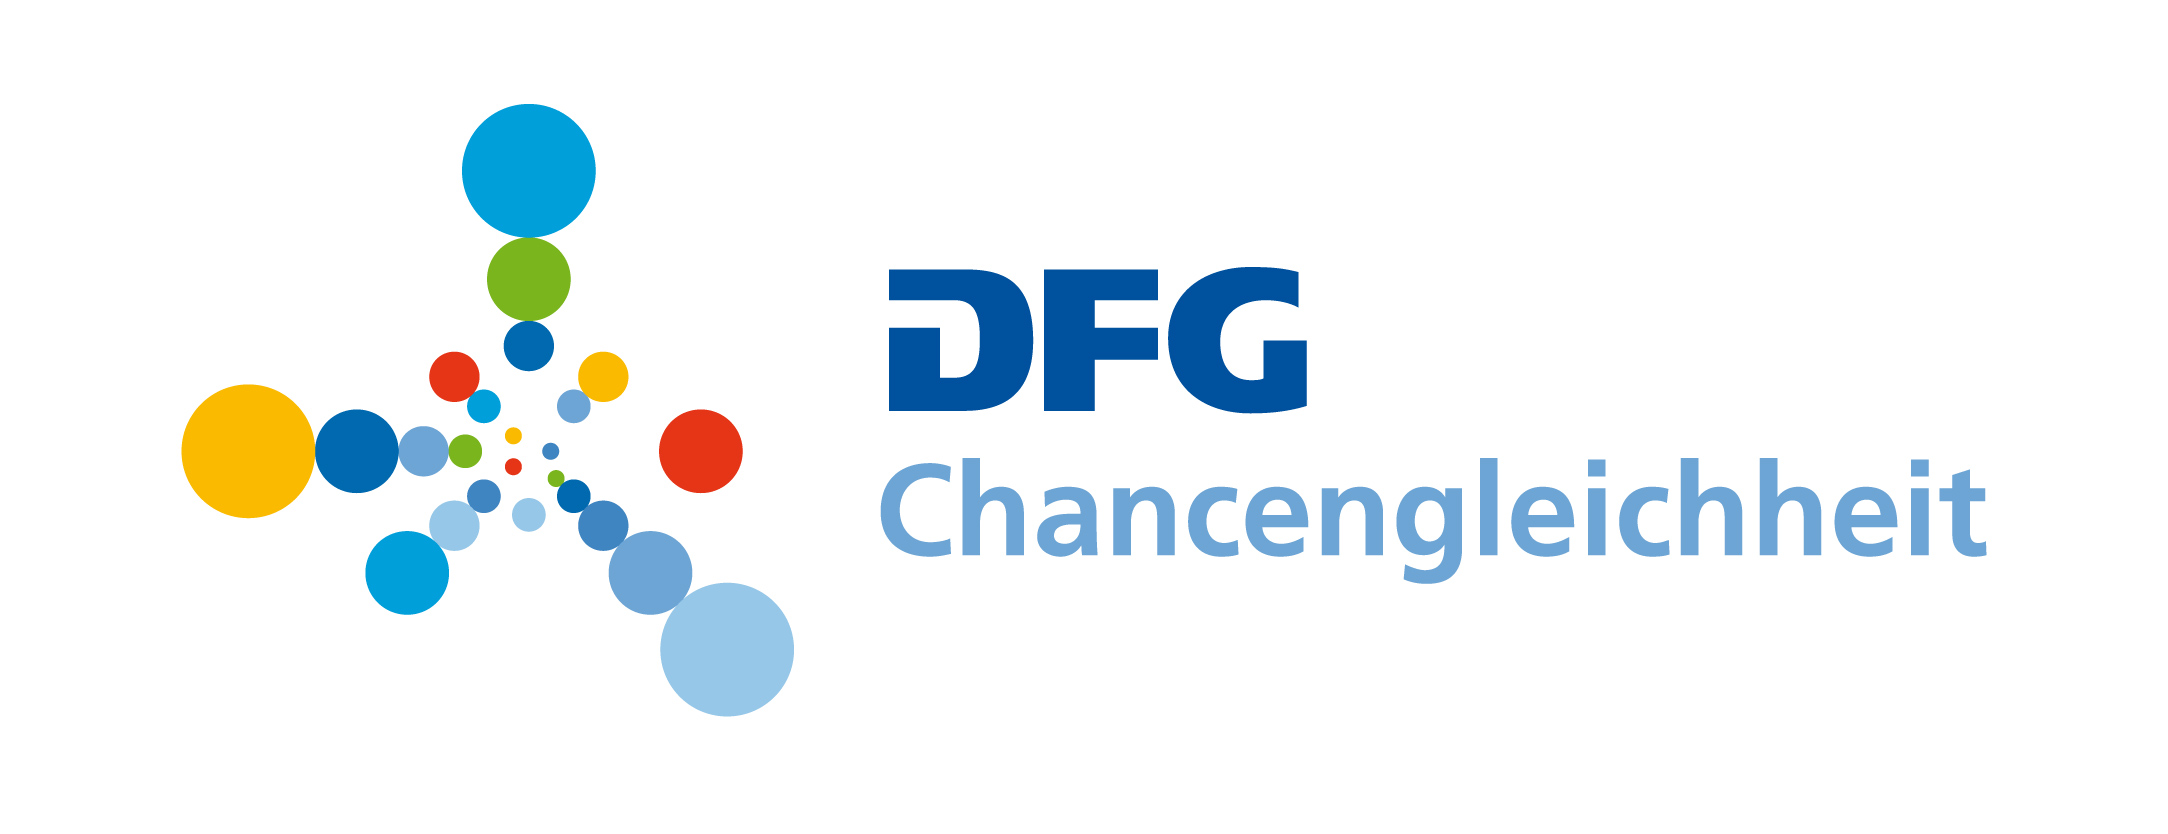 DFG Launches New Initiative for Equal Opportunities and Diversity